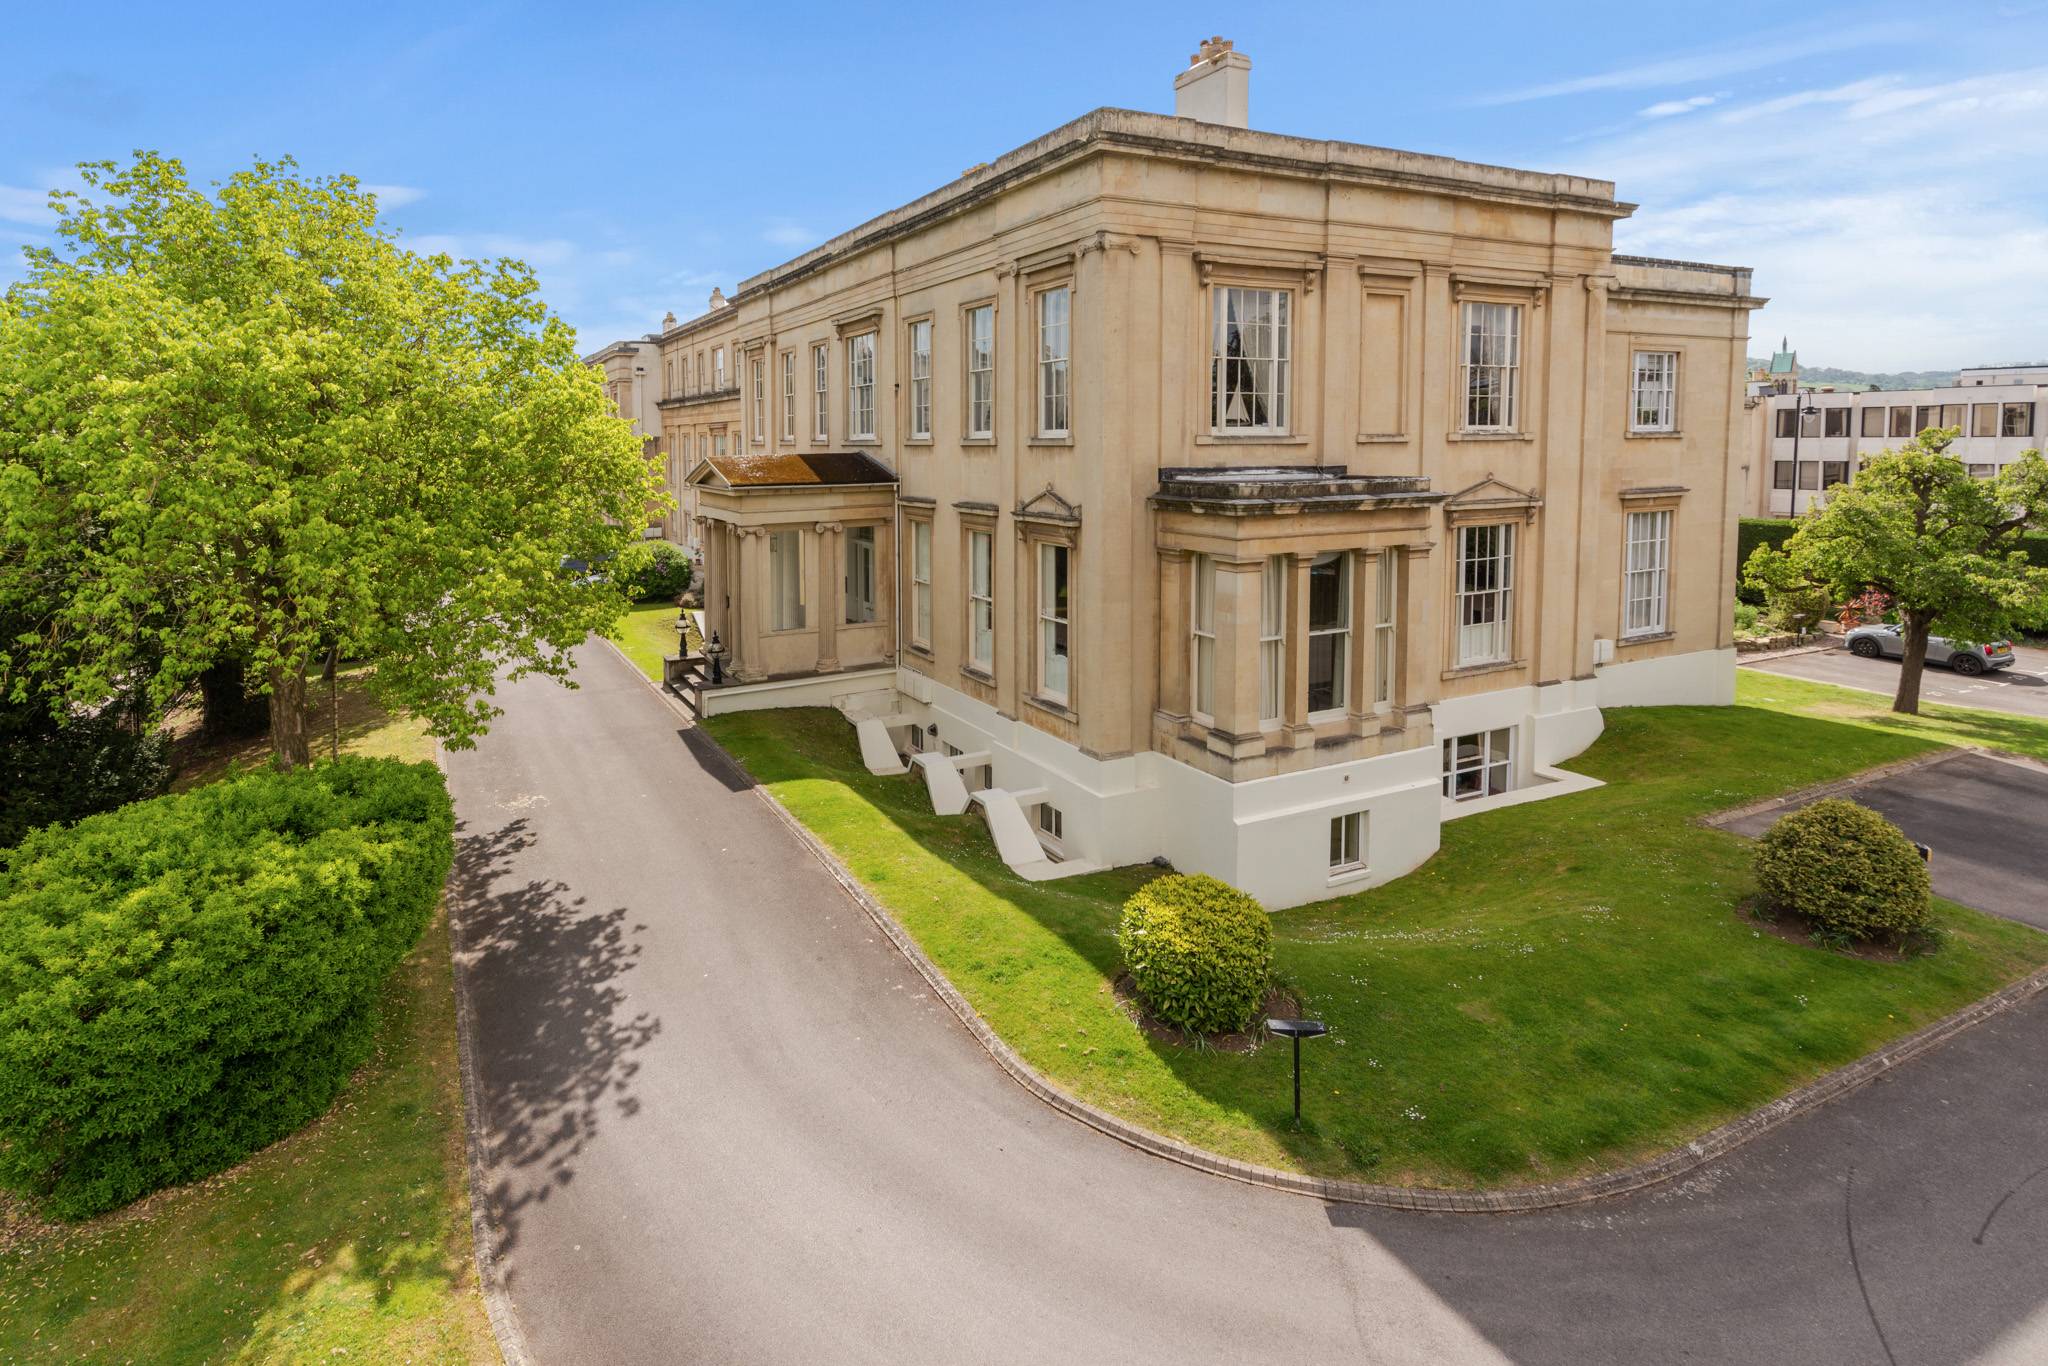 A delightful two bedroom apartment which forms part of this impressive Grade ll listed detached mansion house situated on Suffolk Square.